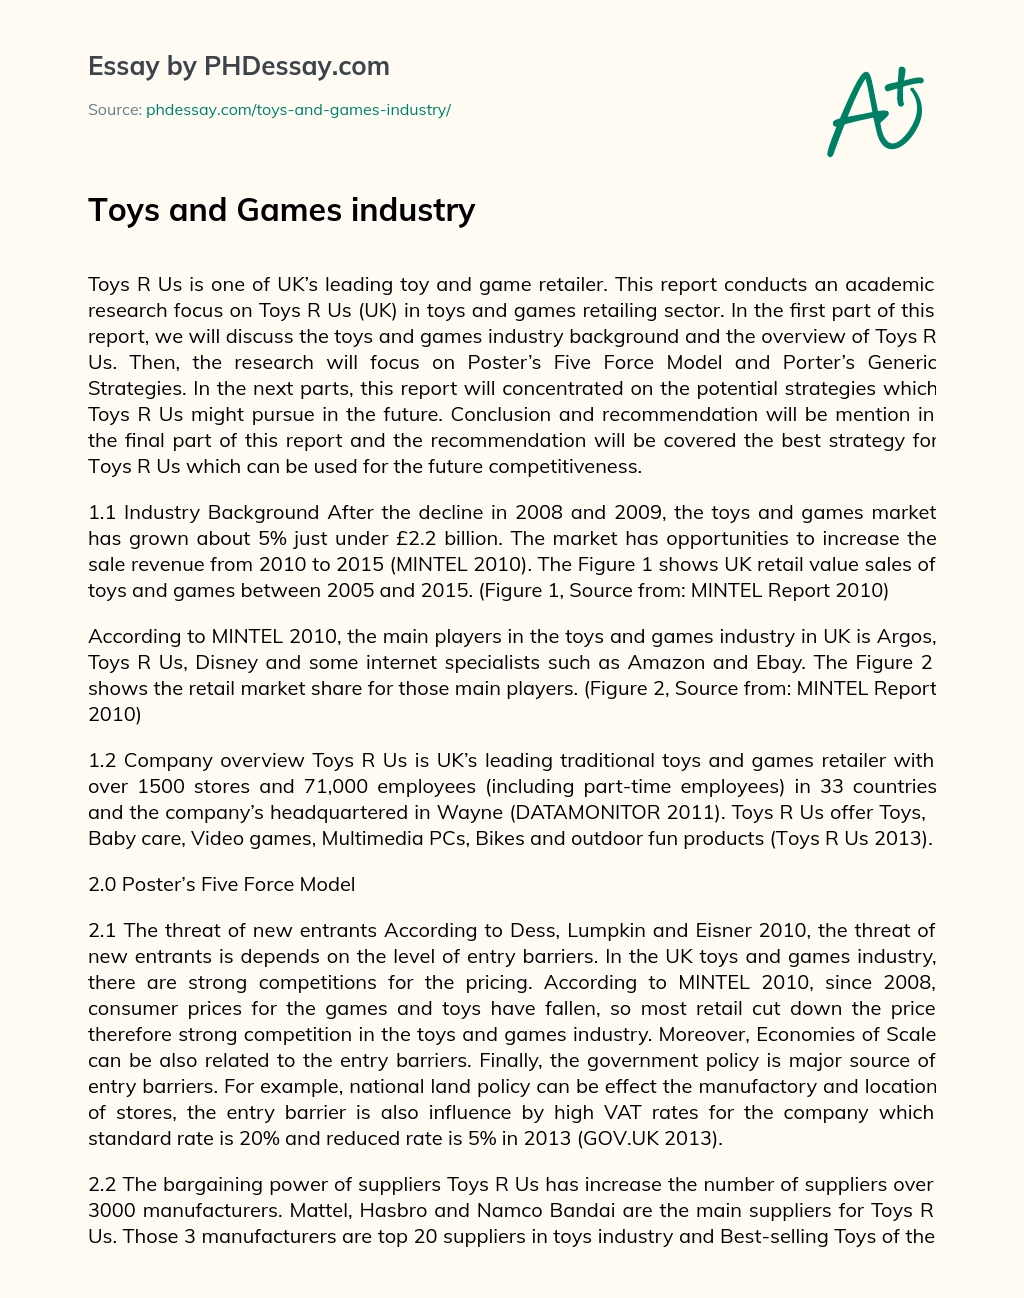 Toys and Games industry essay